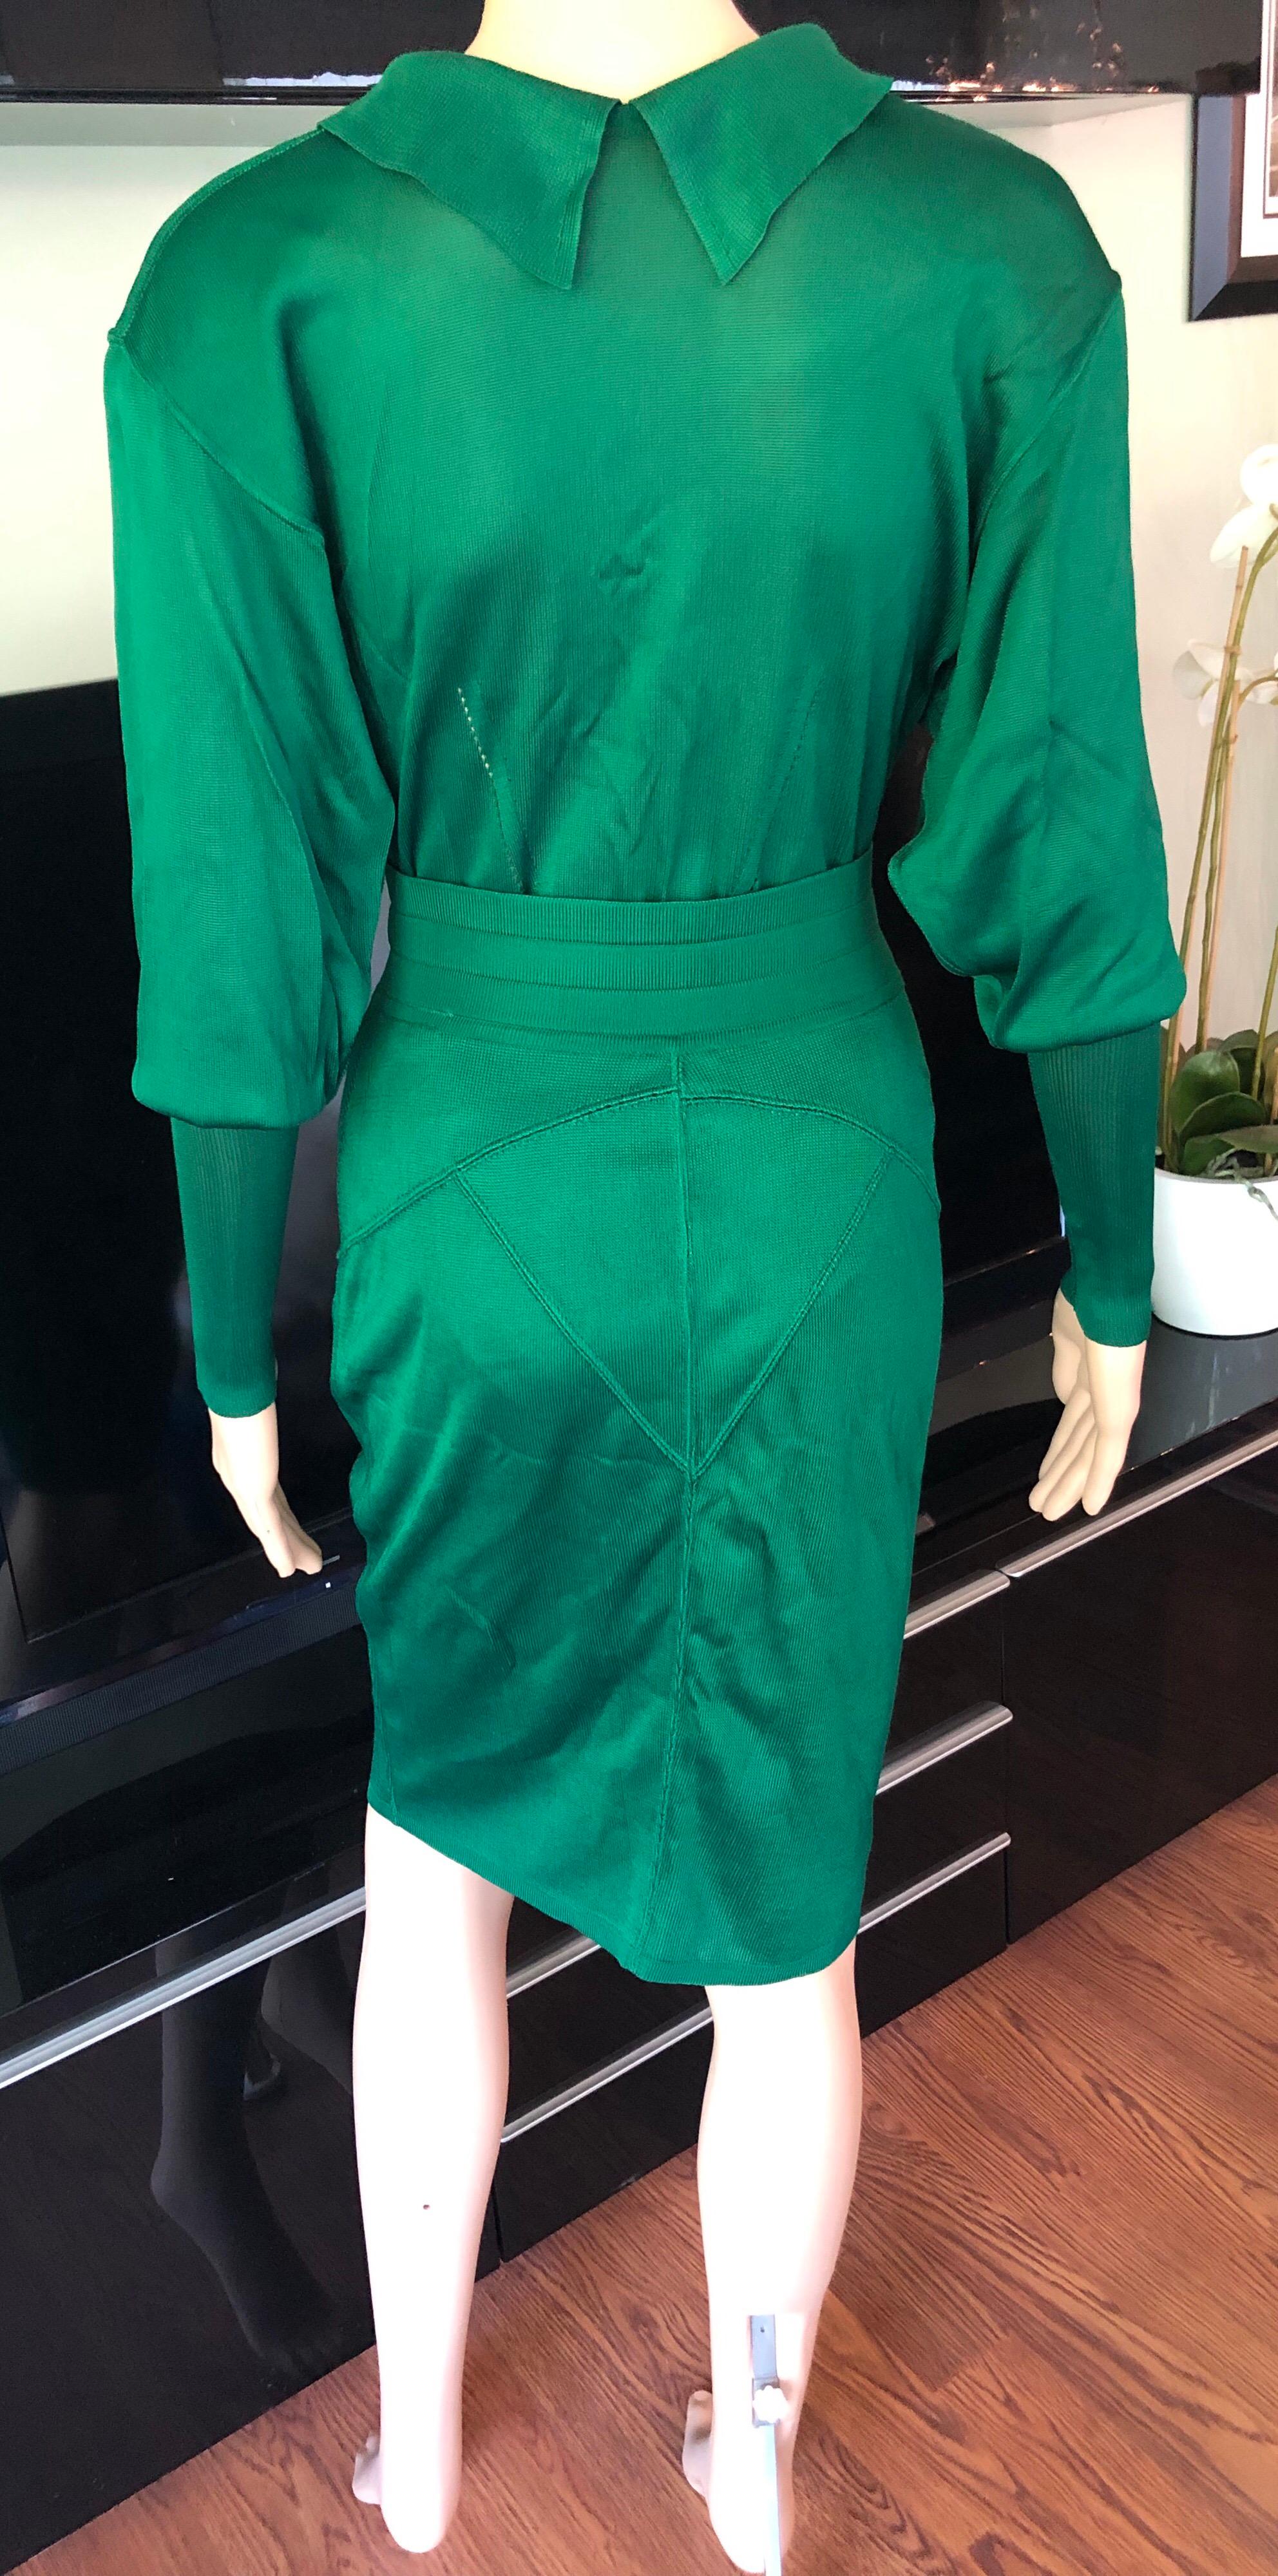 Azzedine Alaia Vintage Fitted Skirt and Bodysuit Top 2 Piece Set 

Emerald Alaïa knit skirt set. Long sleeve bodysuit features pointed collar, button closures at back and snap closures at bottom. Please note the bodysuit is very versatile and can be